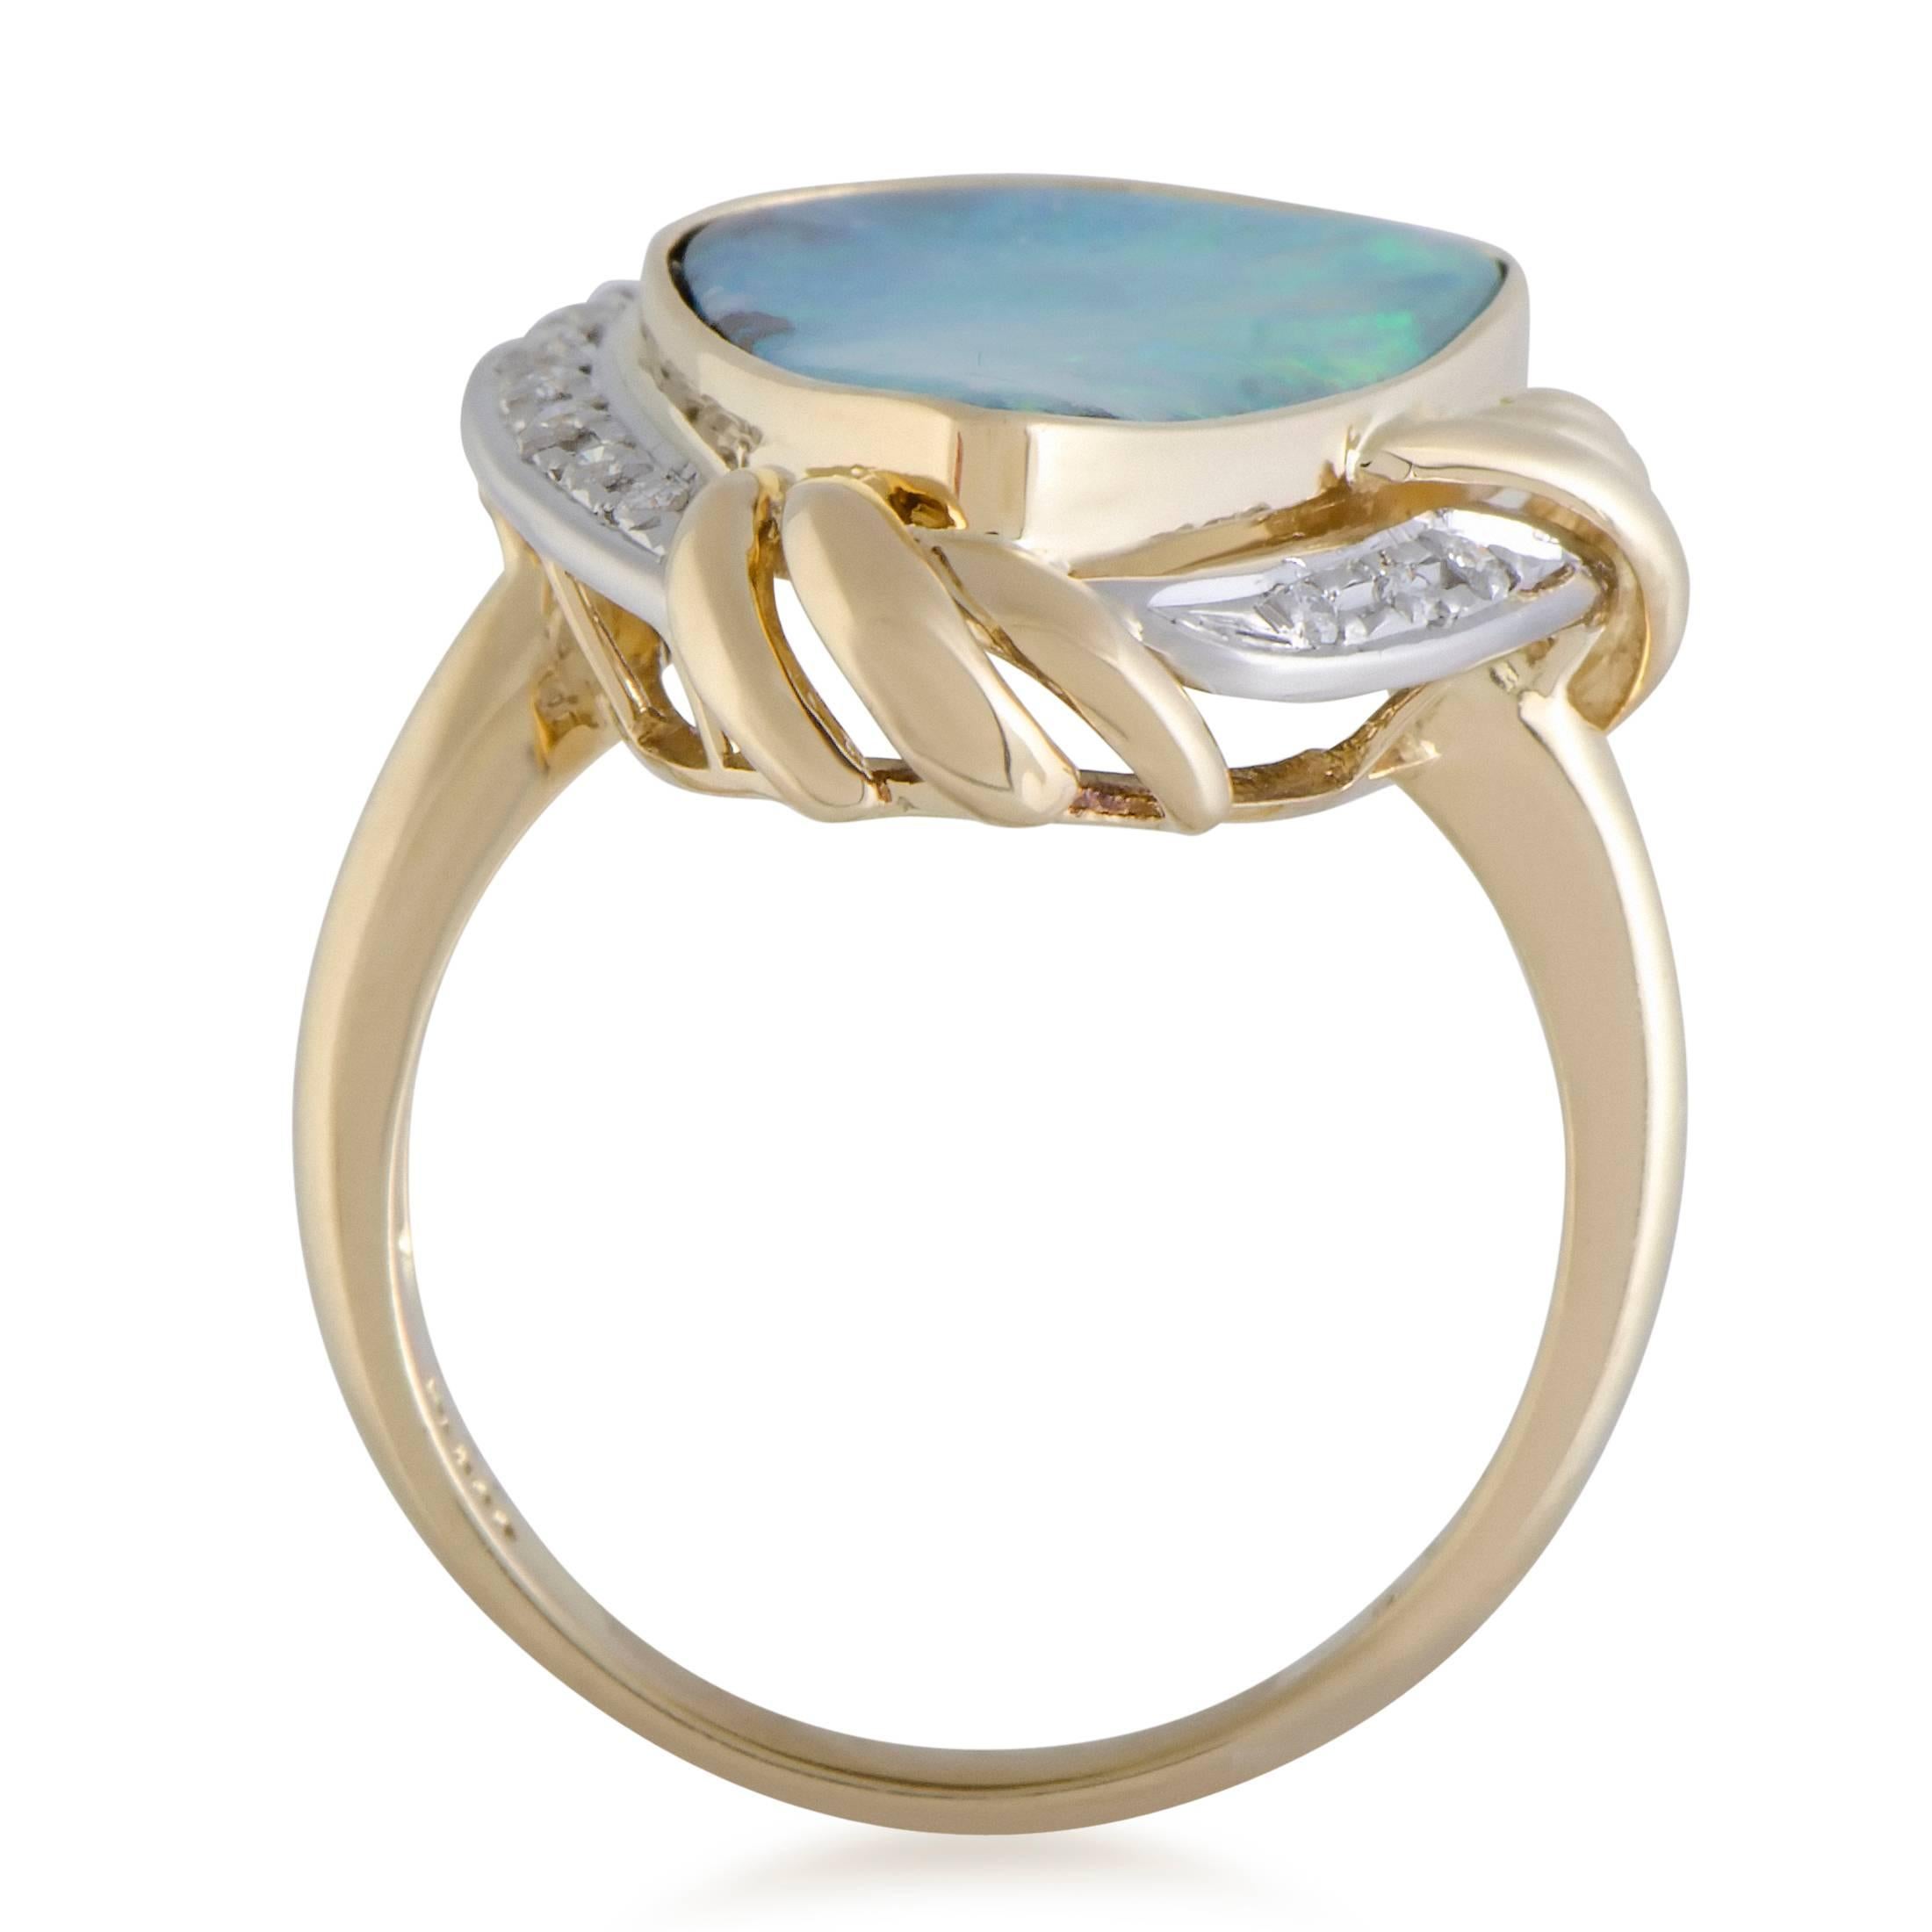 This exquisite ring boasts a luxurious décor and an ever-enthralling design. The beautiful ring has a 5.01ct alluring opal stone surrounded by 0.26ct of dazzling diamonds that immensely elevate the beauty of the remarkable piece.
Ring Top